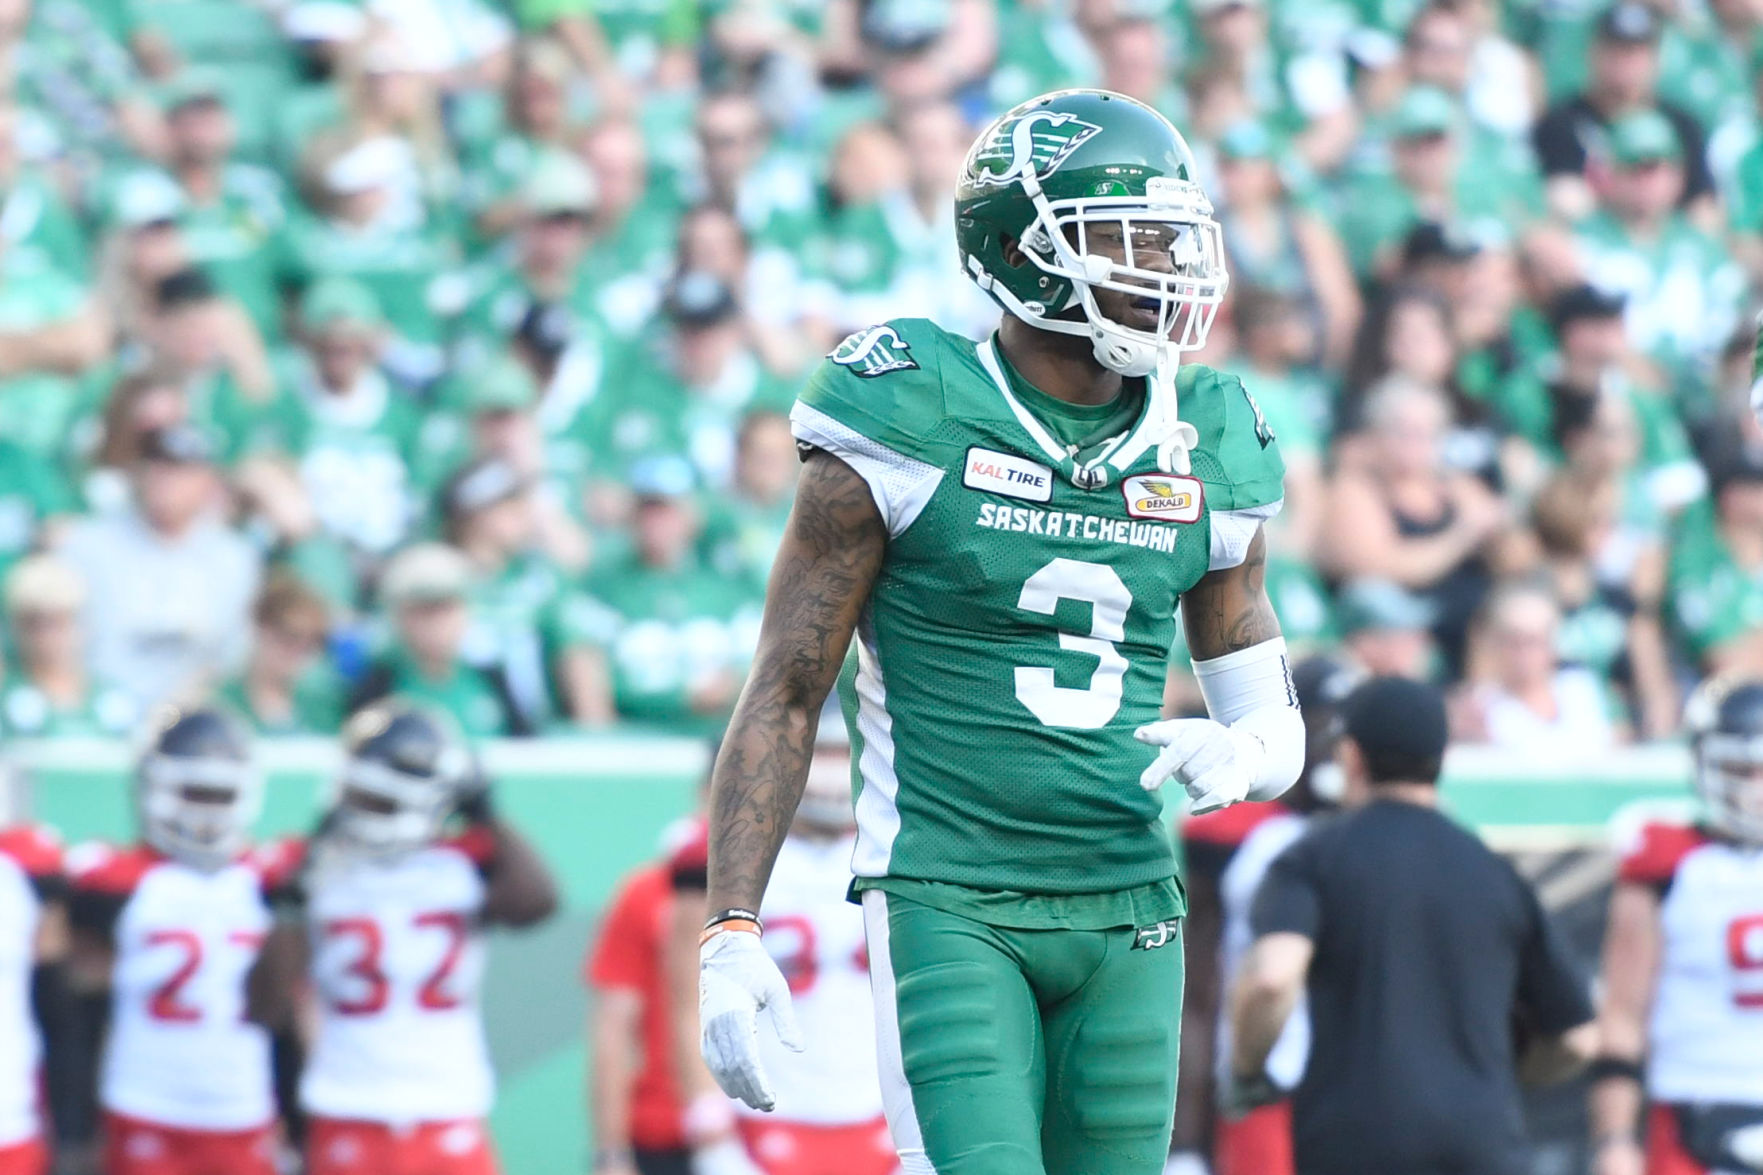 Watch former Auburn star Nick Marshall score two touchdowns for CFLs Roughriders